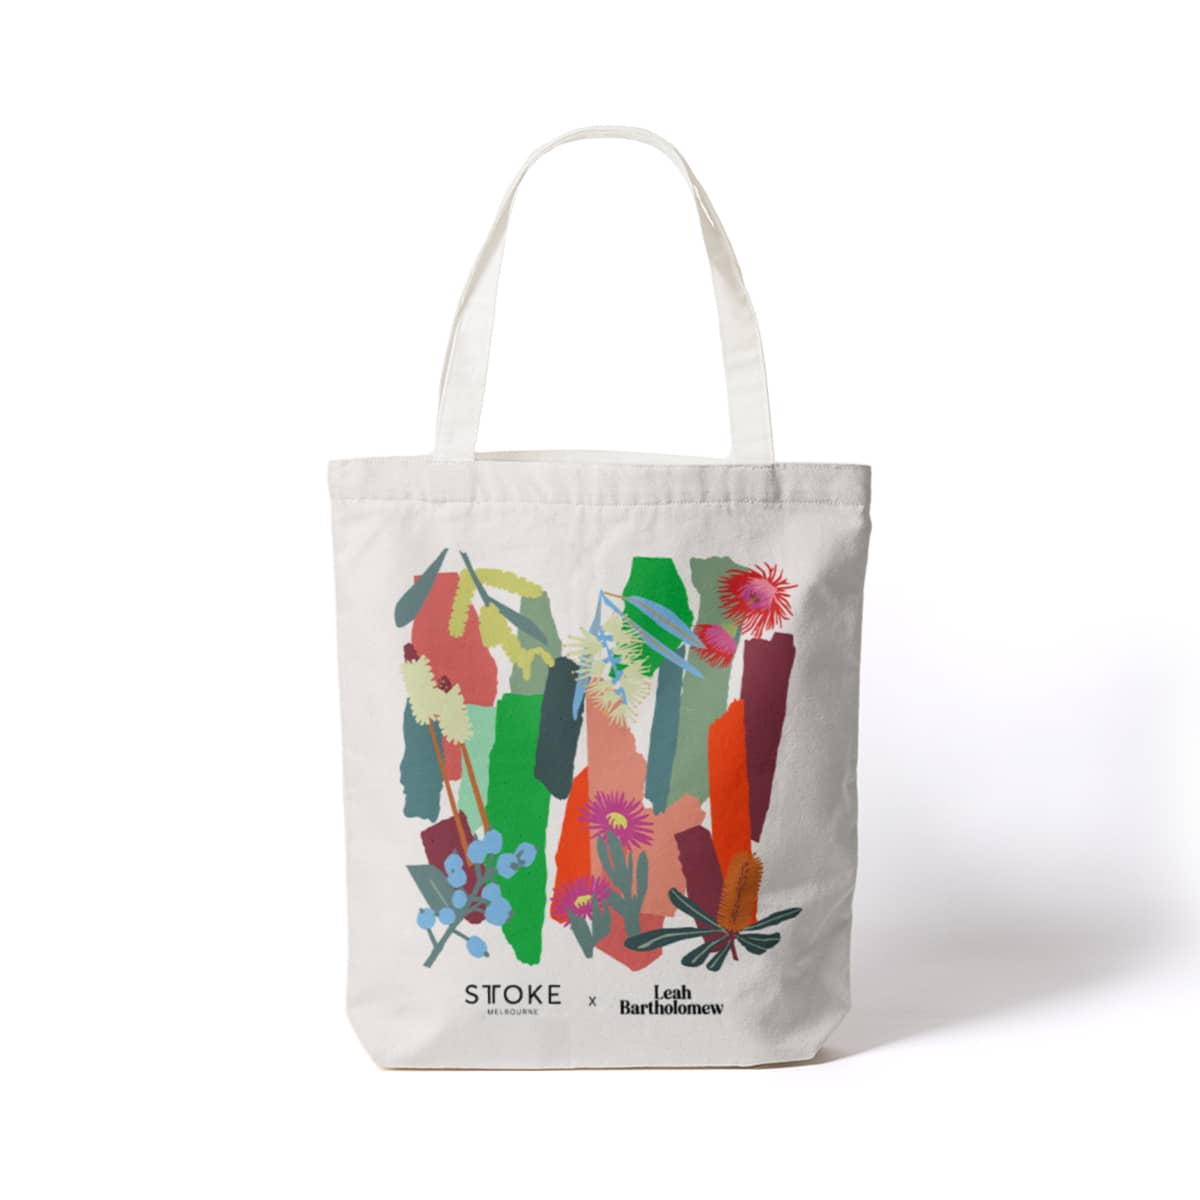 Two for the Casual Commuter + Free Tote bag